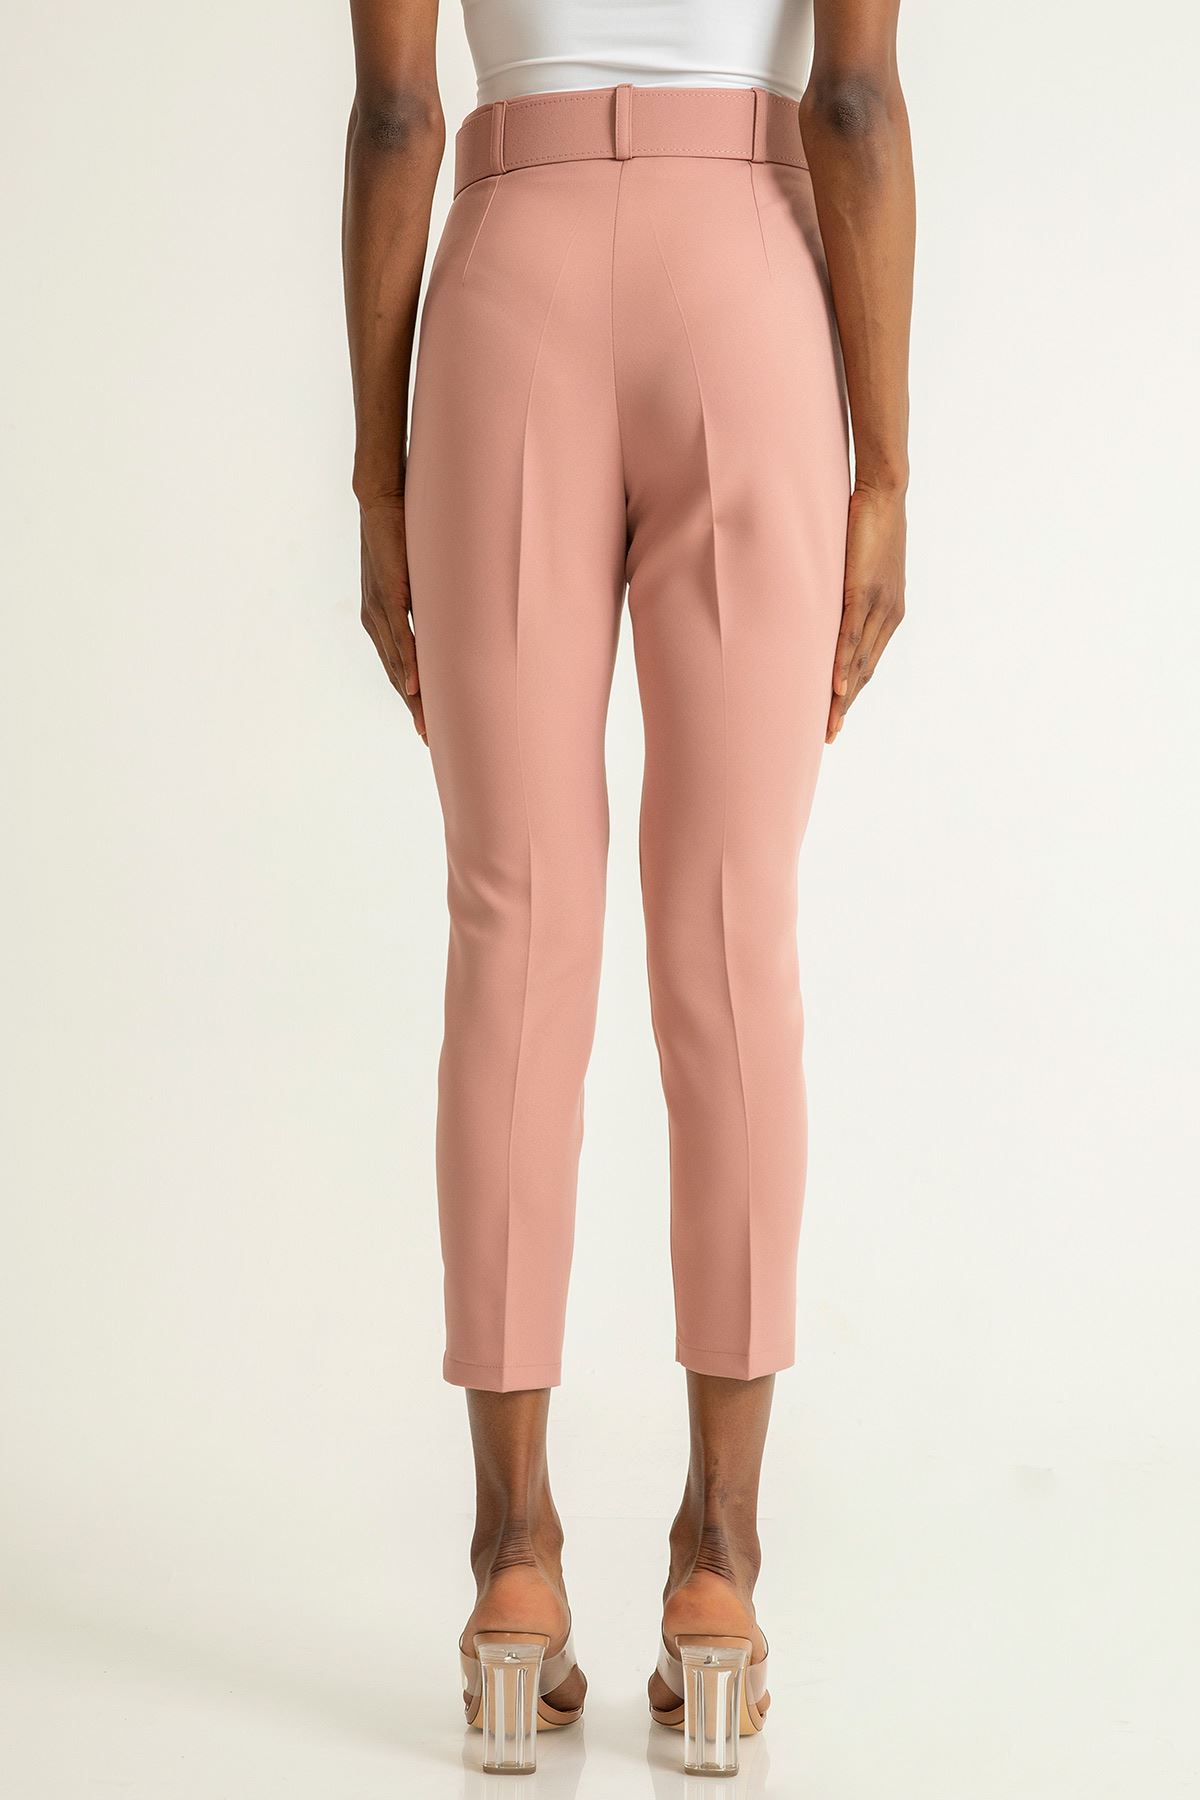 Atlas Fabric Ankle Length Tight Fit Women'S Trouser With Belt - Light Pink